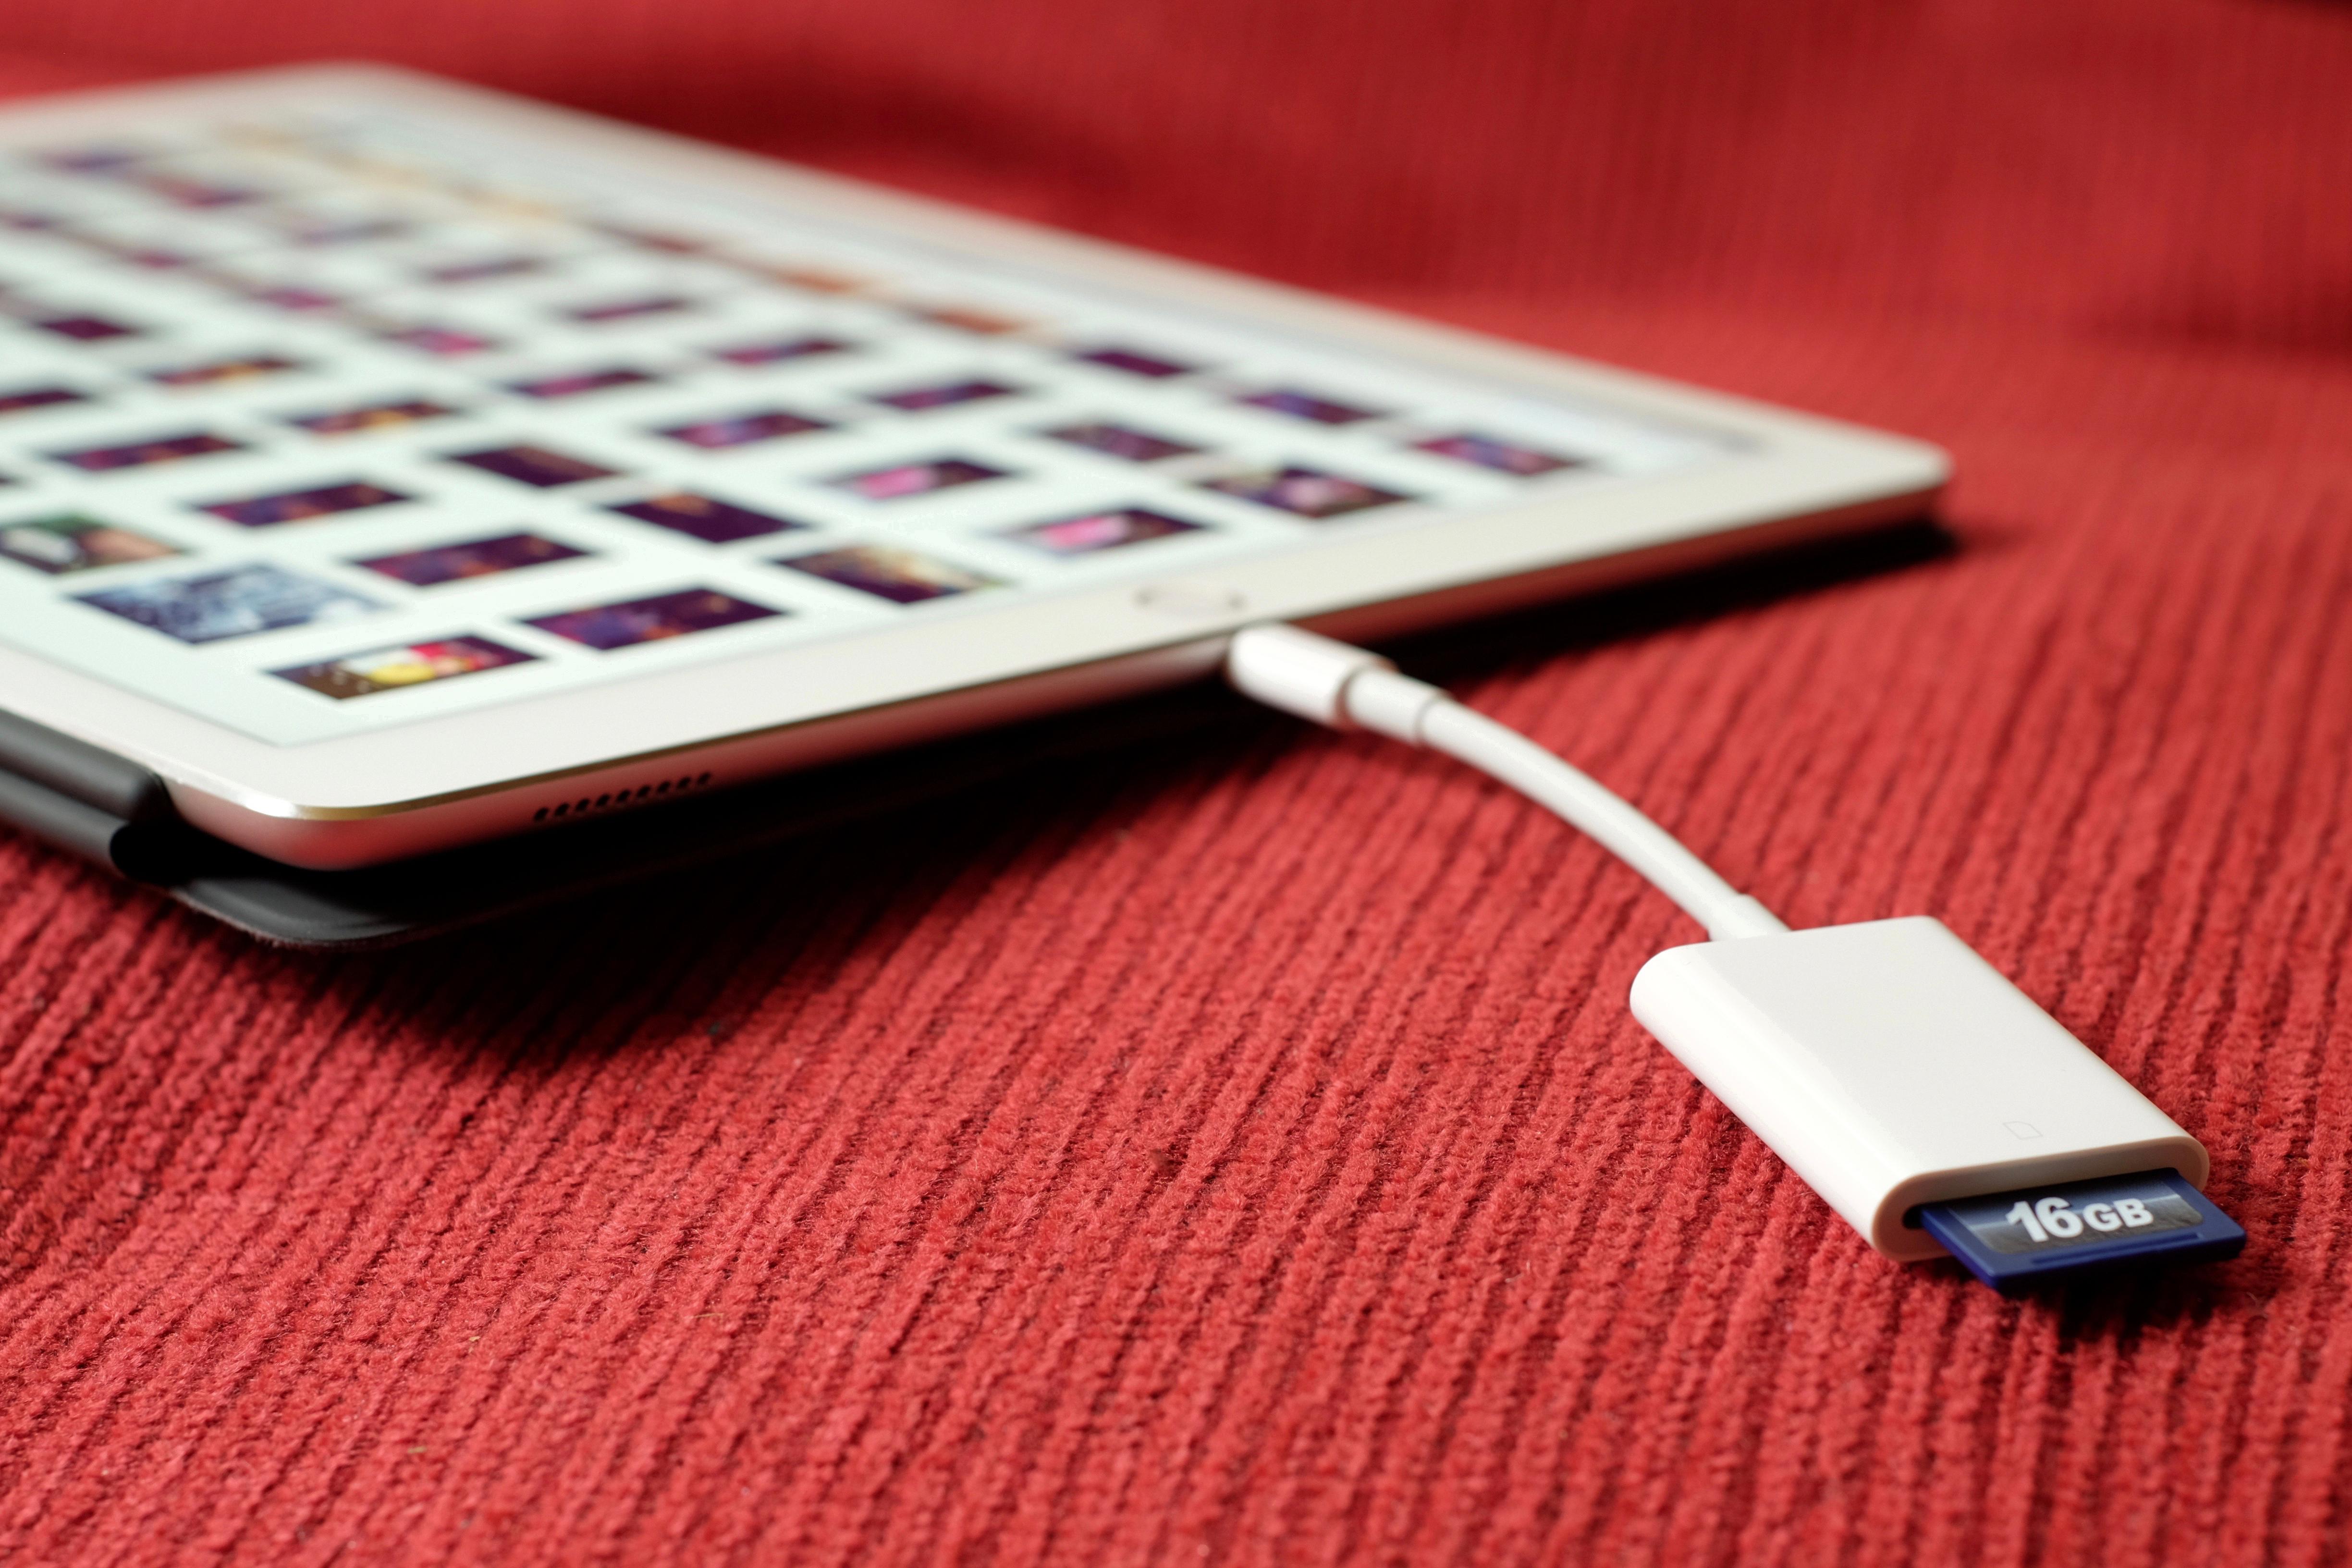 How To Eject Usb From Your iPad 8